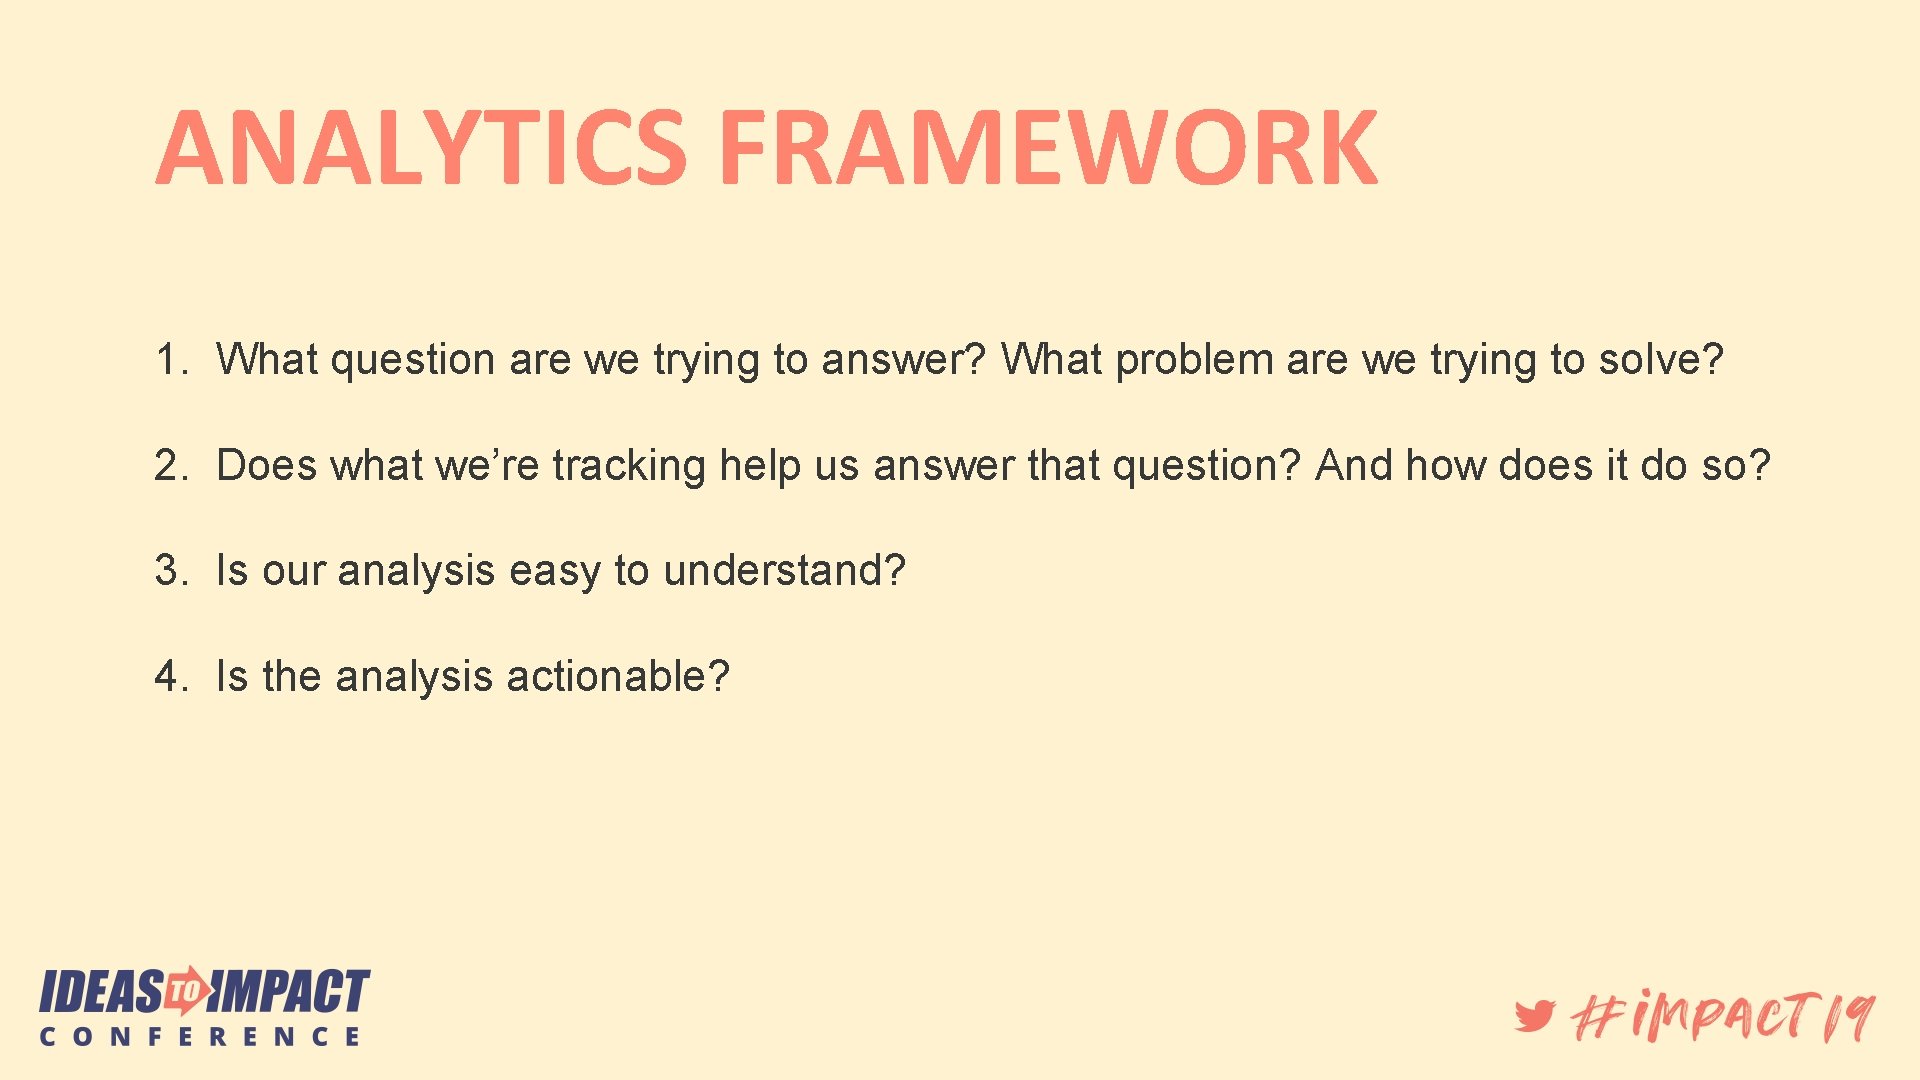 ANALYTICS FRAMEWORK 1. What question are we trying to answer? What problem are we